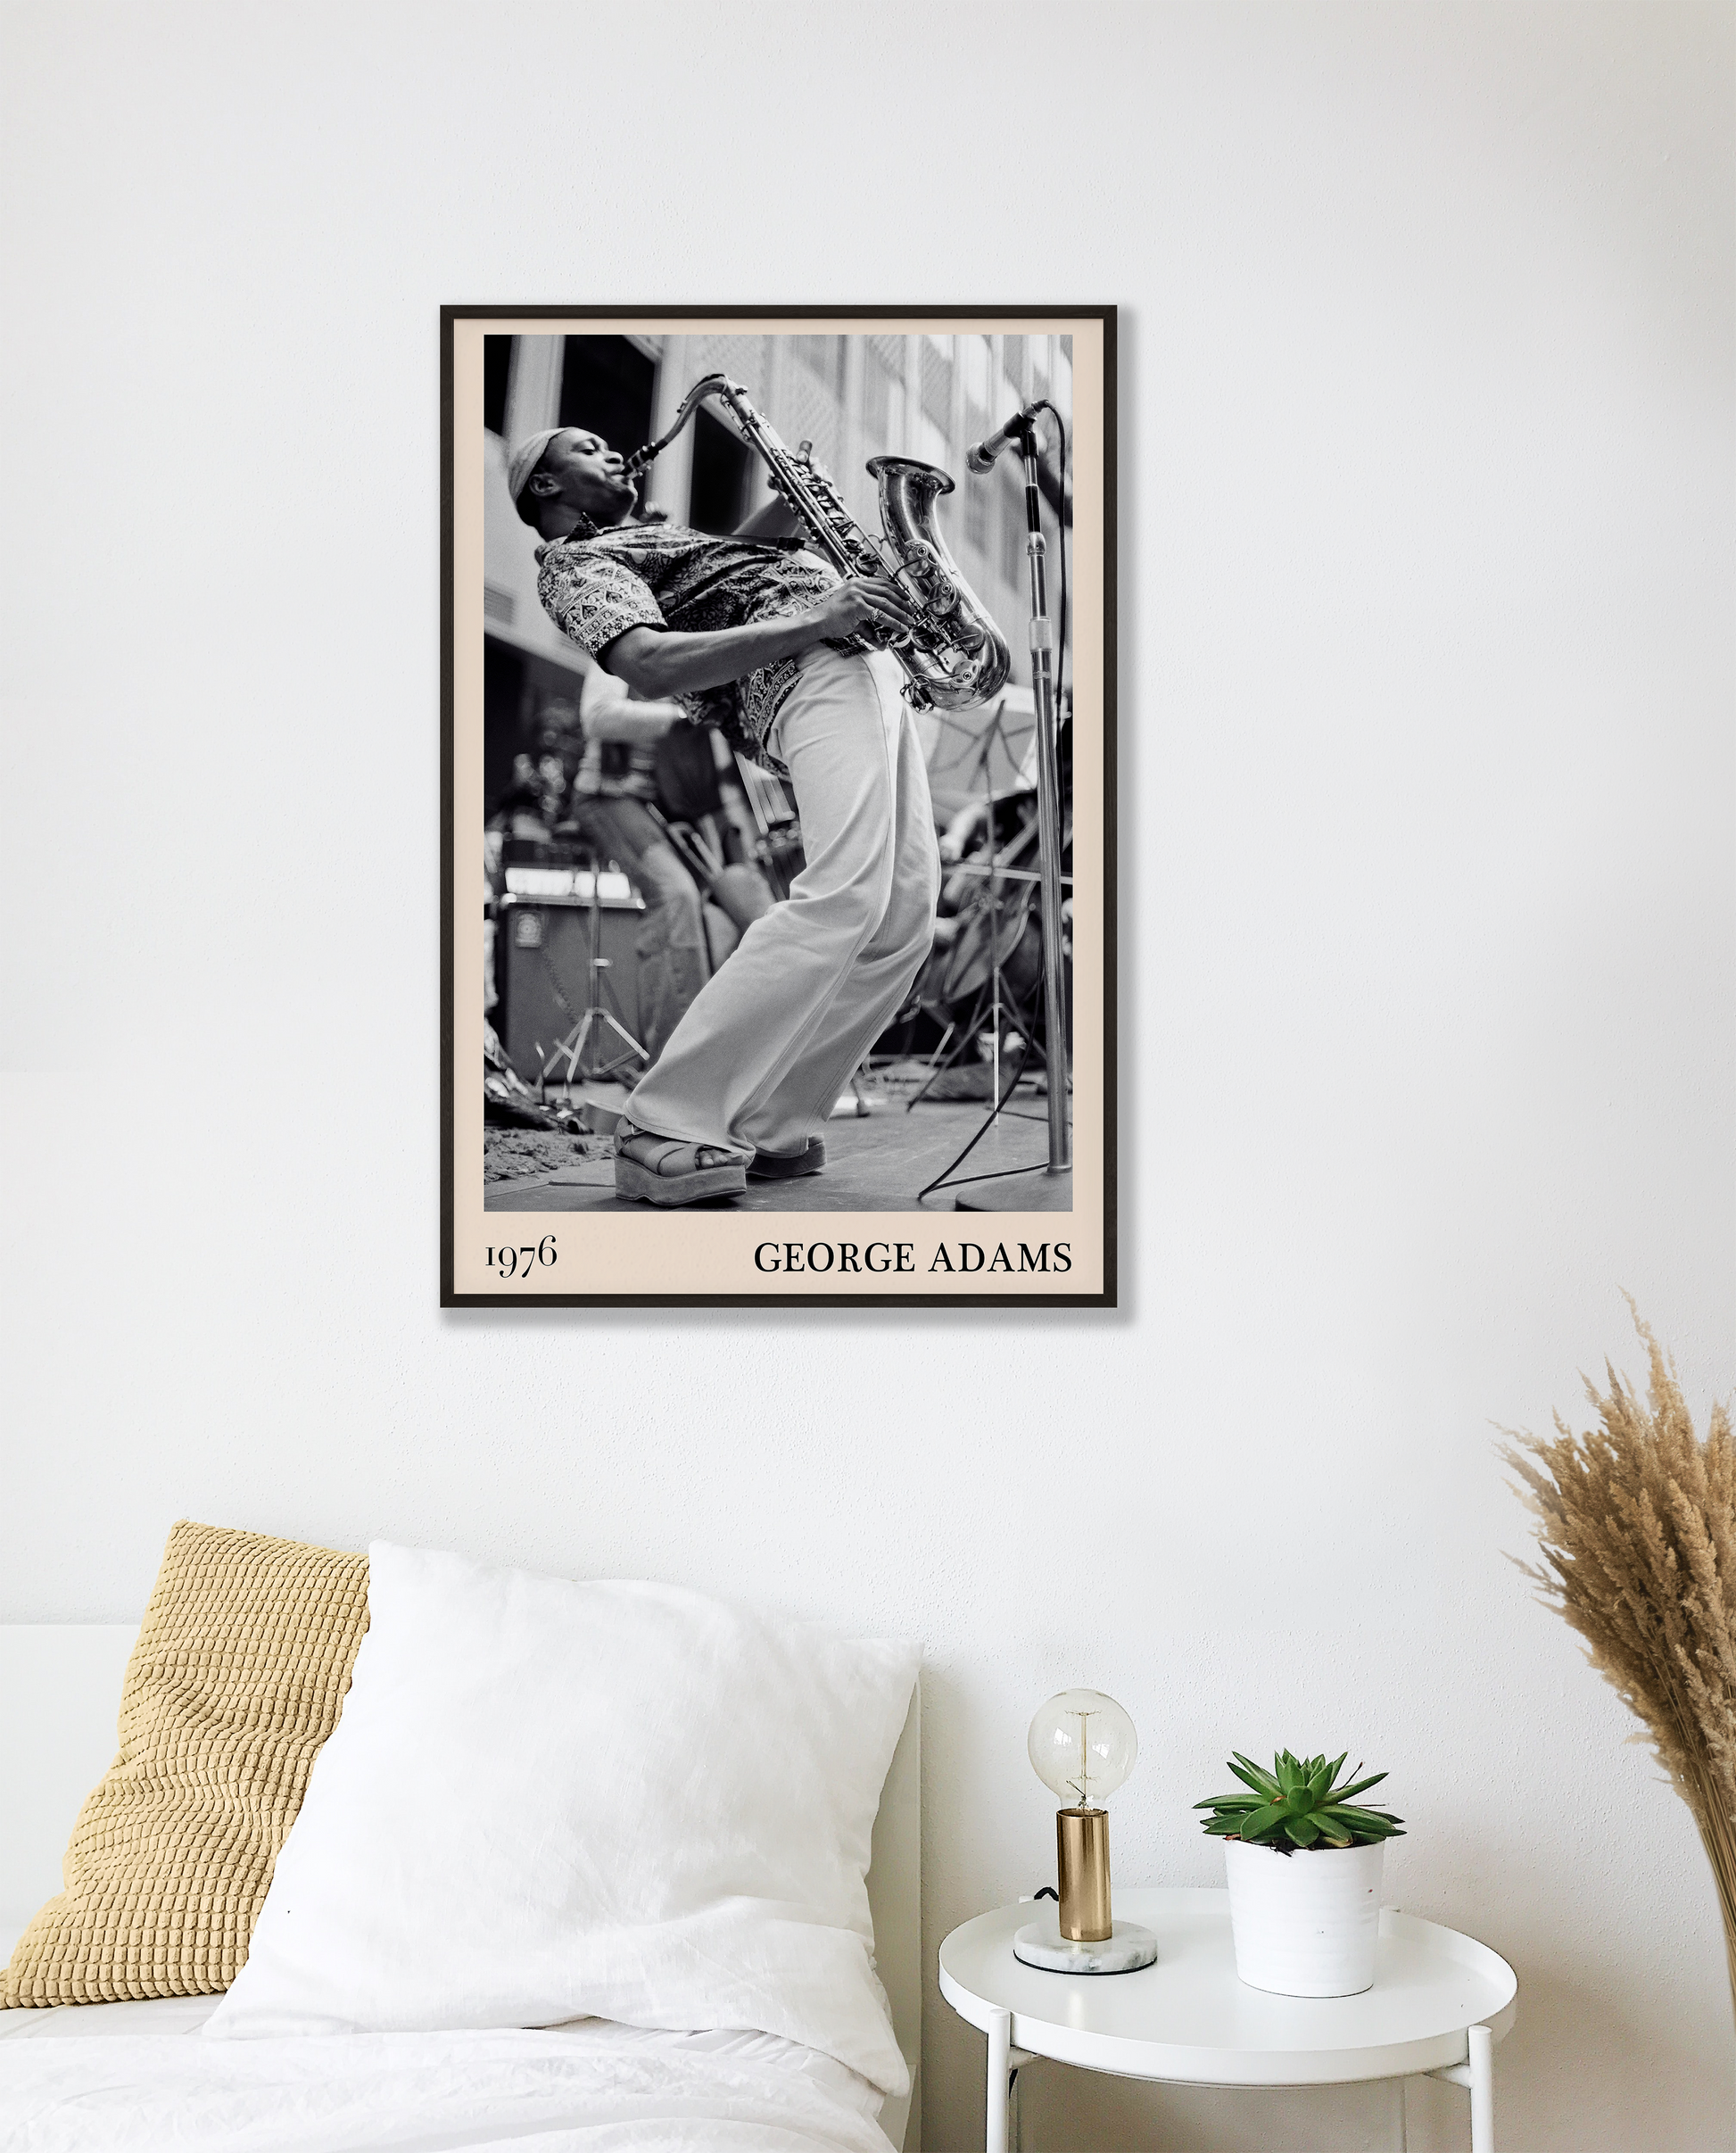 1976 photograph of George Adams taken by Thomas Marcello. Picture crafted into a cool black framed jazz print, with an off-white border. Poster is hanging on a white bedroom wall.